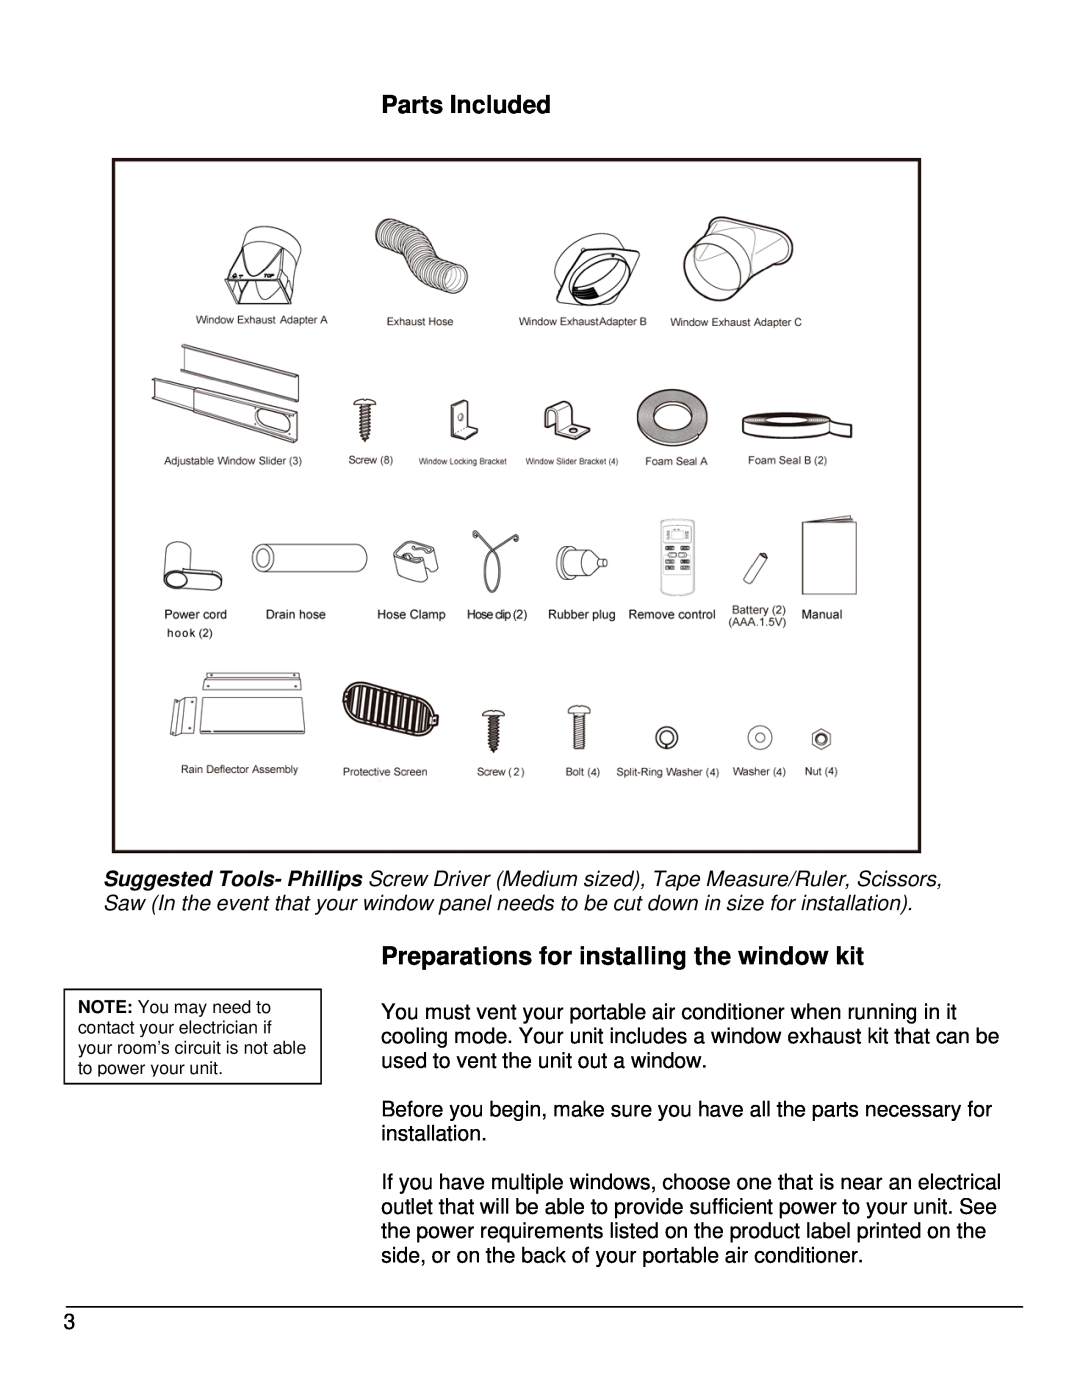 EdgeStar AP10002BL owner manual Parts Included, Preparations for installing the window kit 